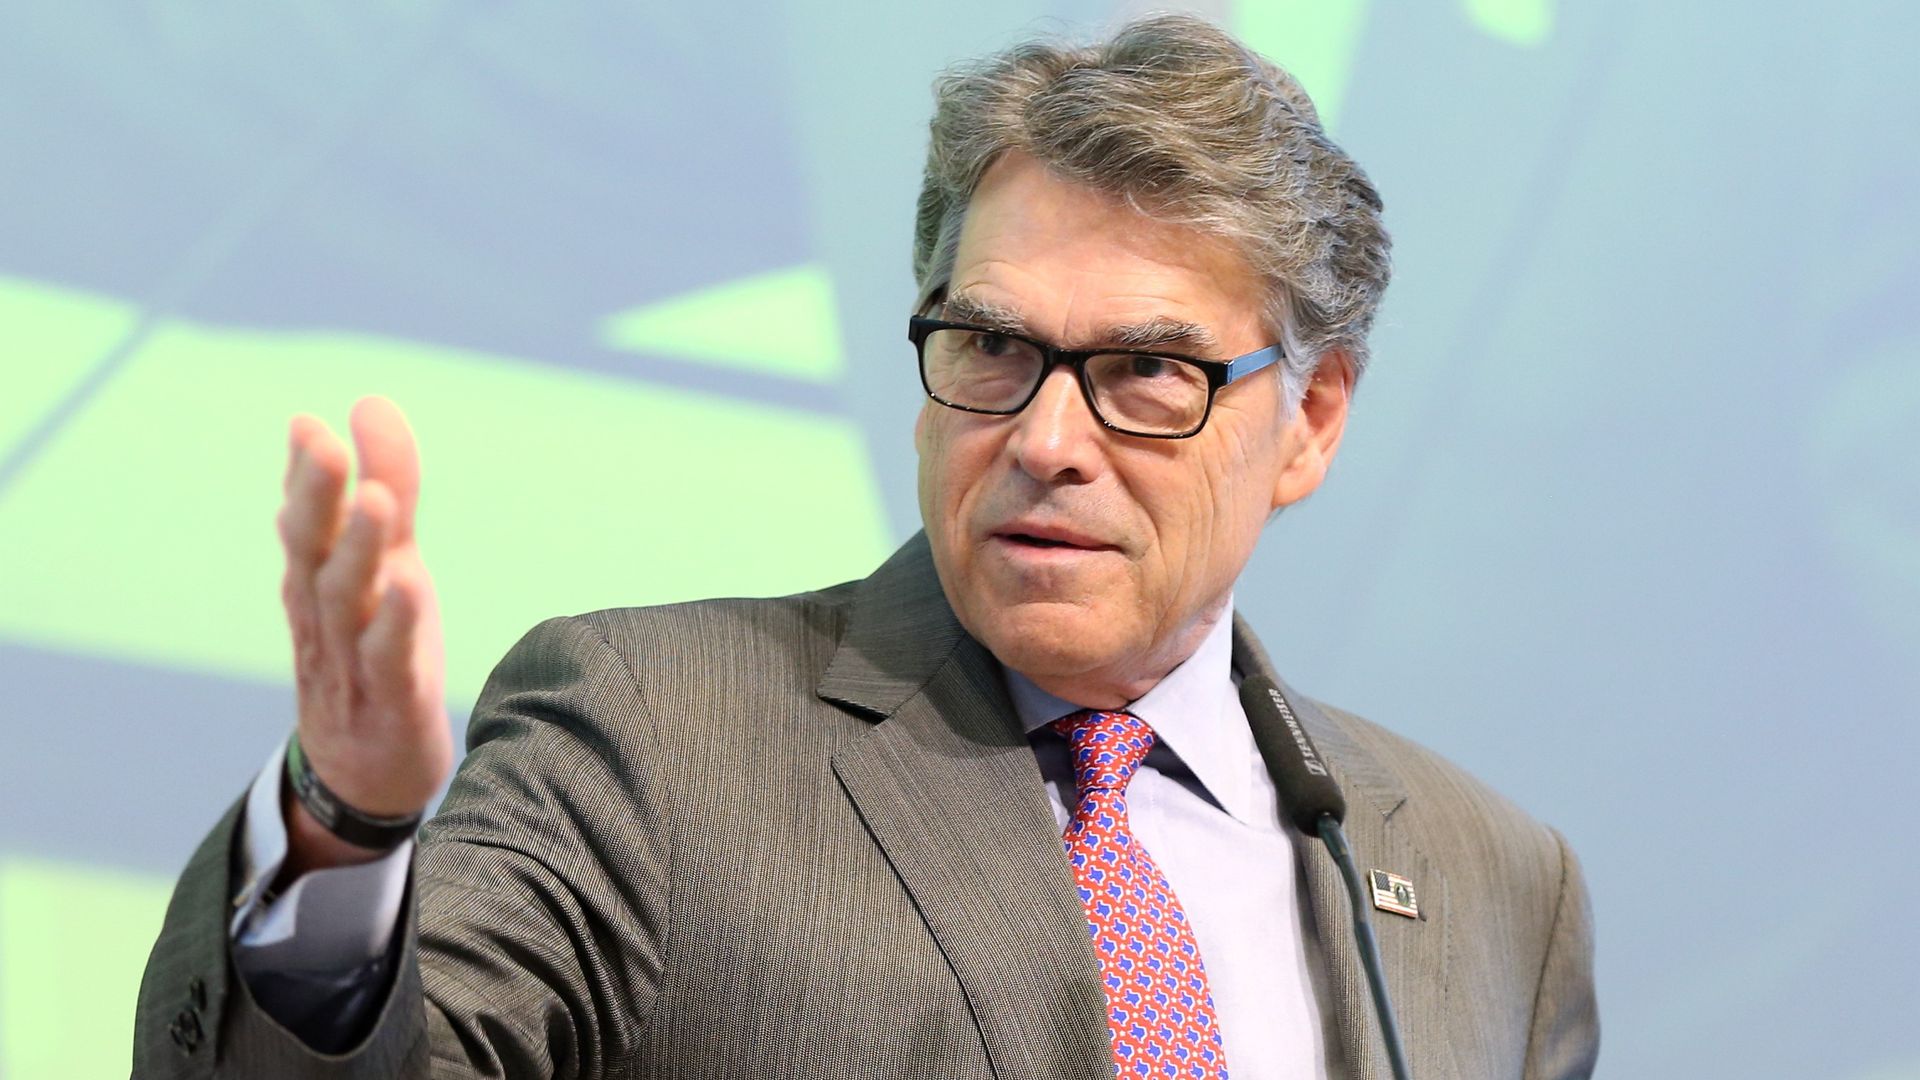 Rick Perry speaking at an event